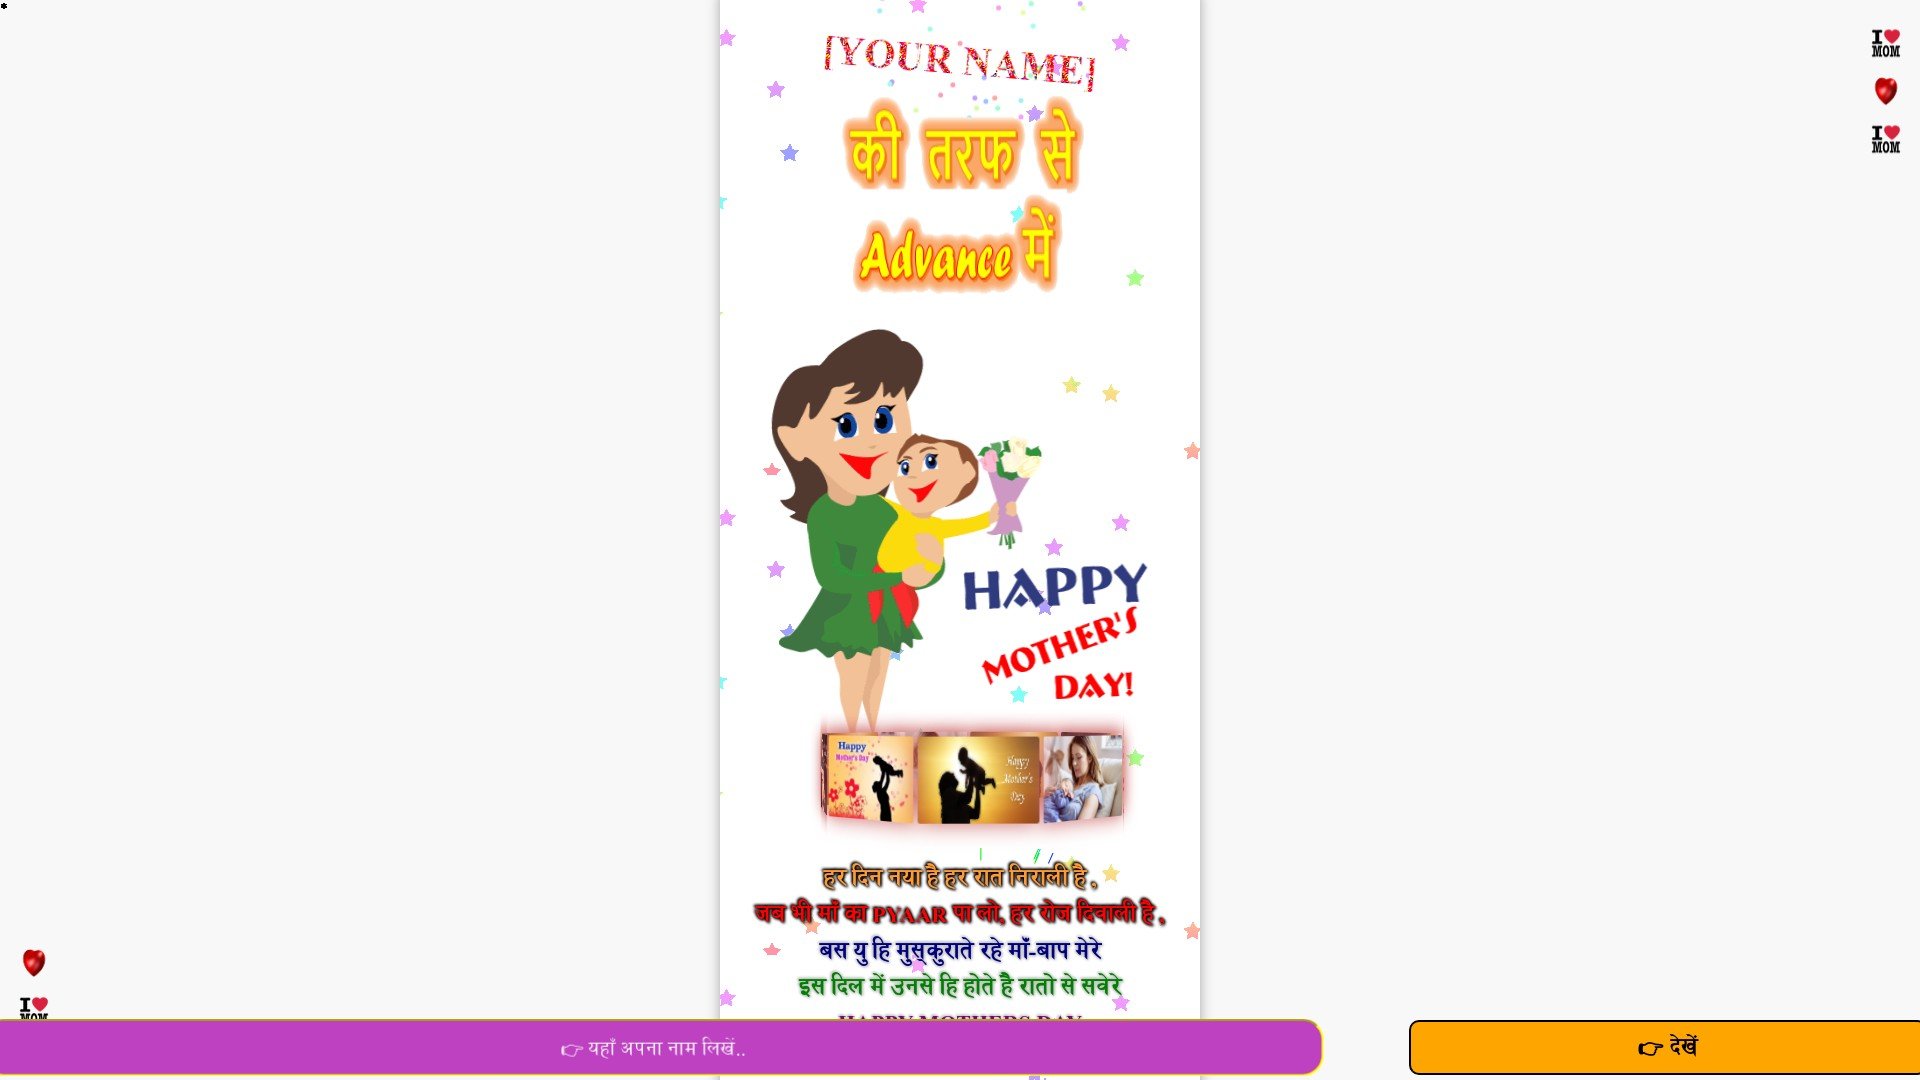 Wish-card in Website - Happy Mothers Day